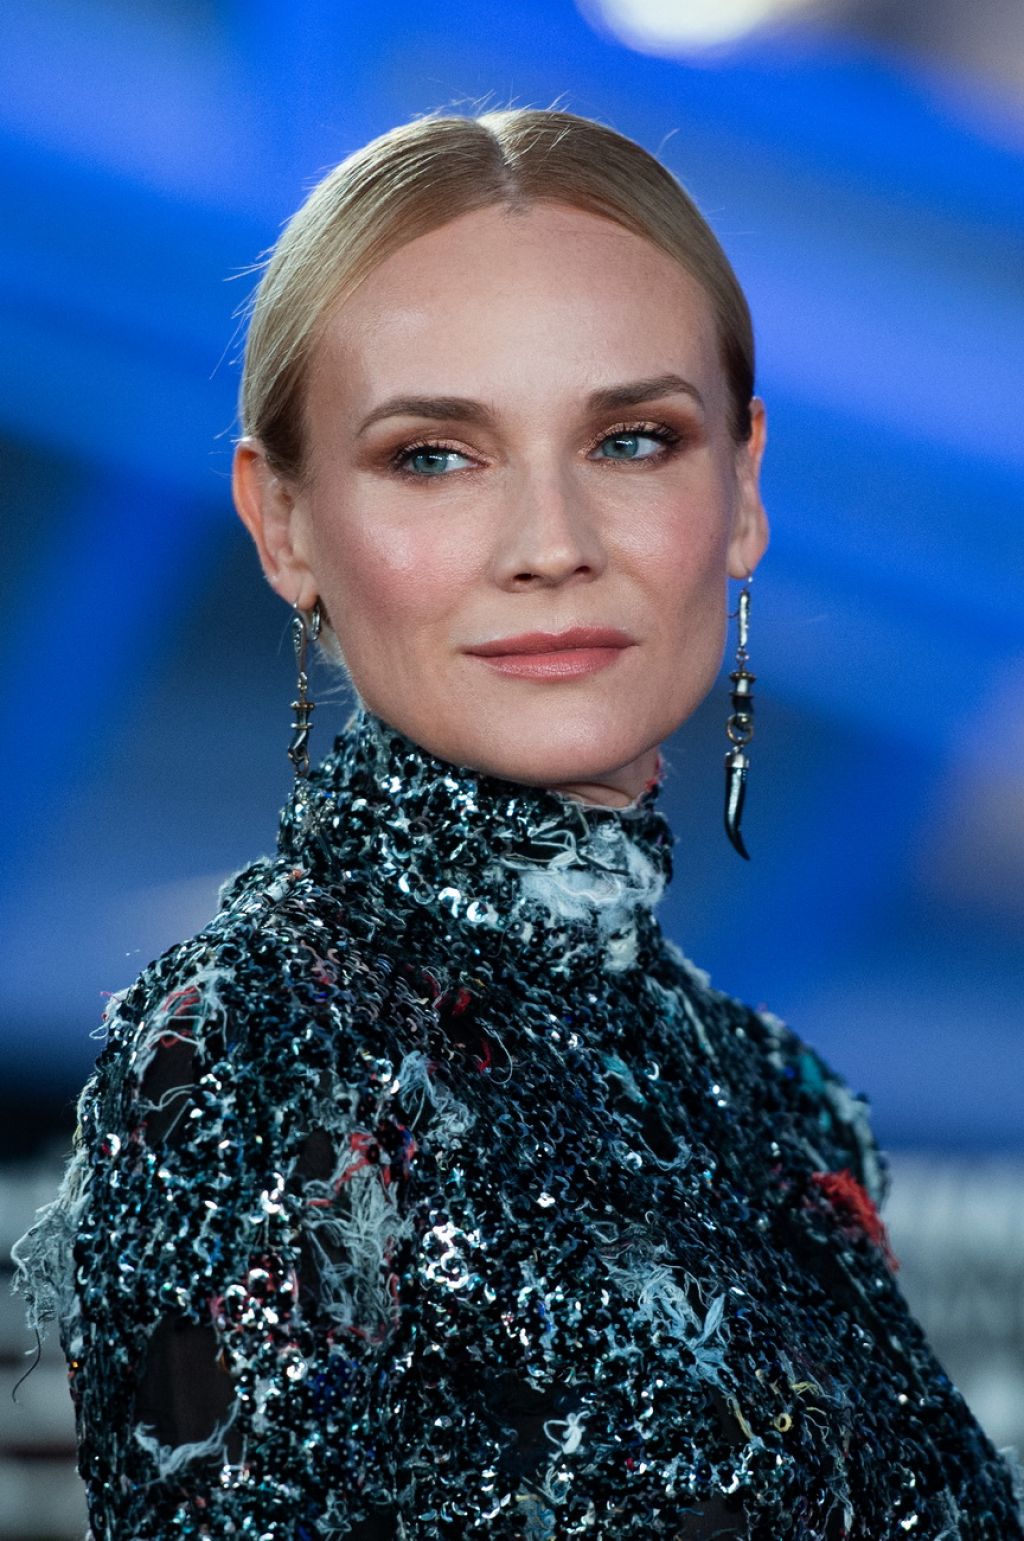 Diane Kruger needs Chanel approval for any style changes